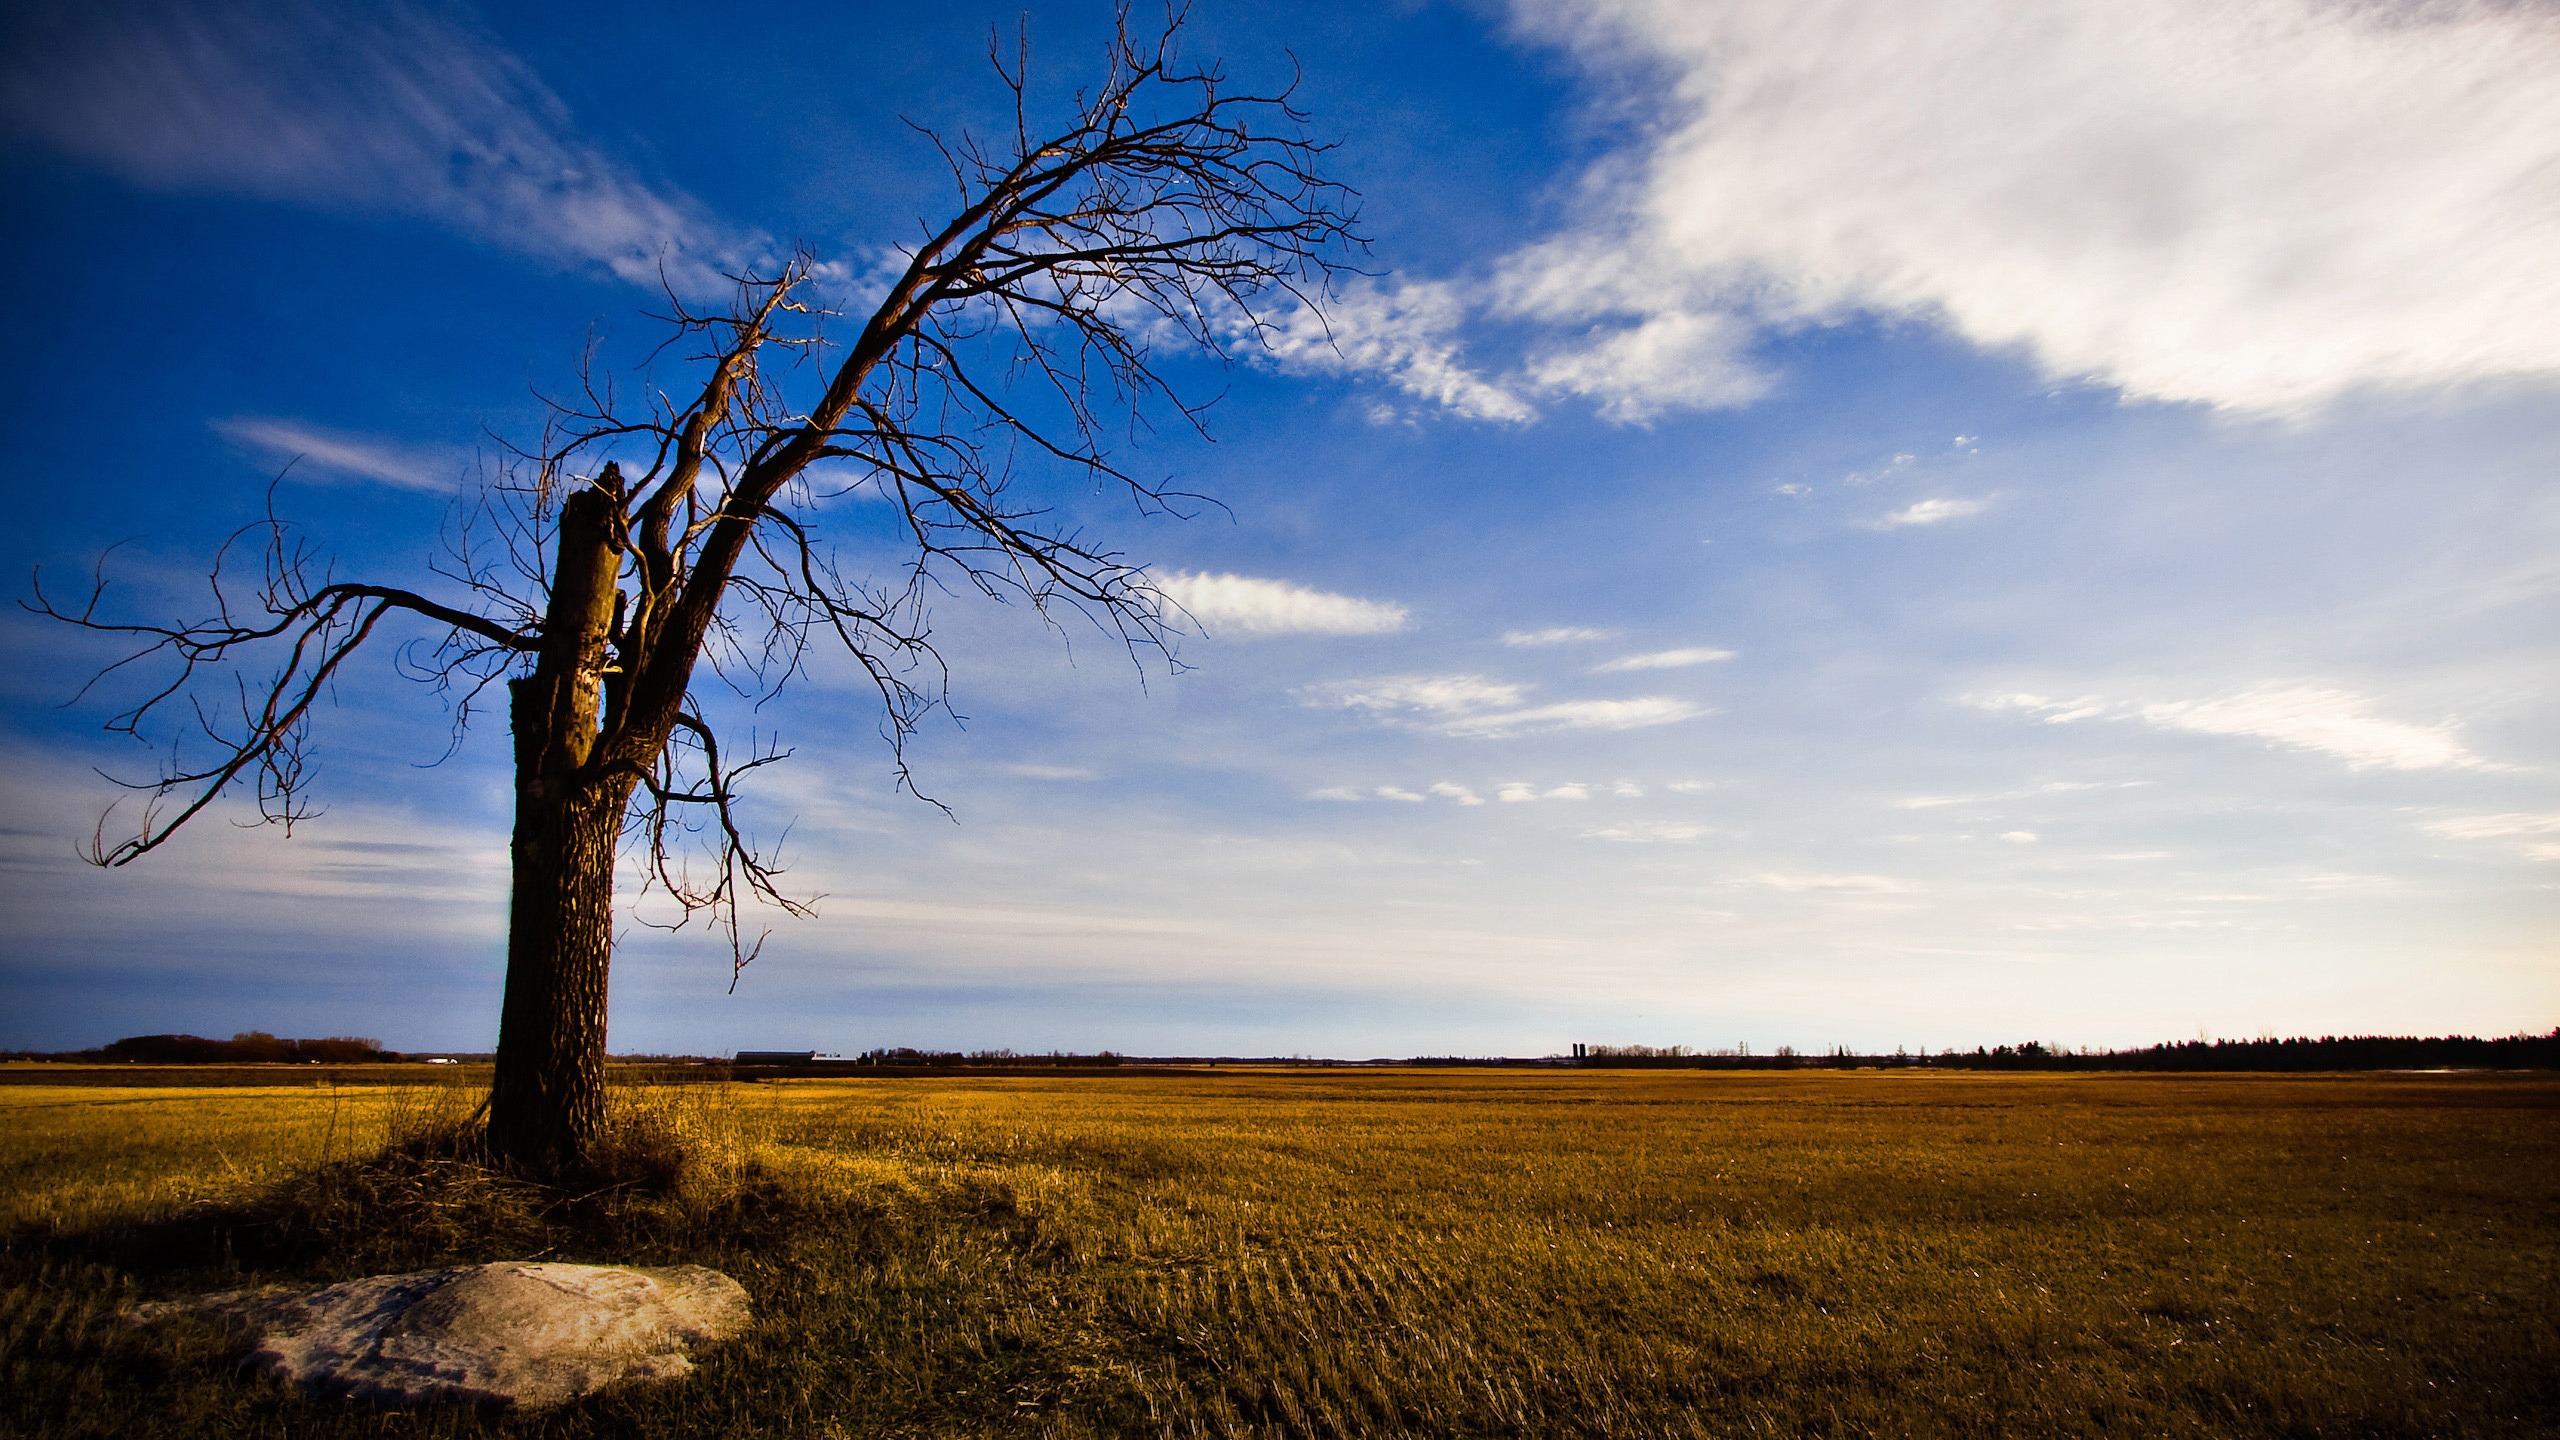 Old and lonely tree HD Wallpaper - WallpaperFX